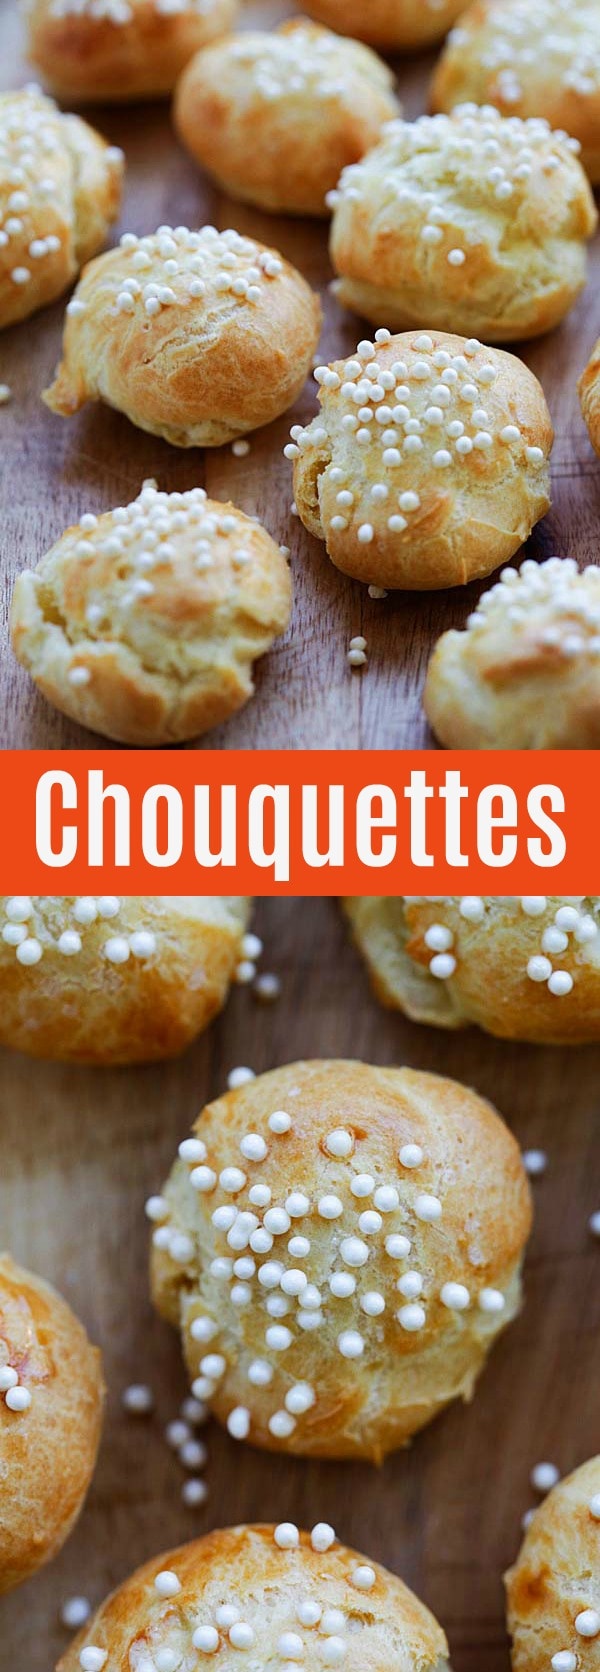 Chouquettes - eggy and pillowy choux pastry covered with sugar. These French cream puffs are so addictive and great with coffee or tea | rasamalaysia.com